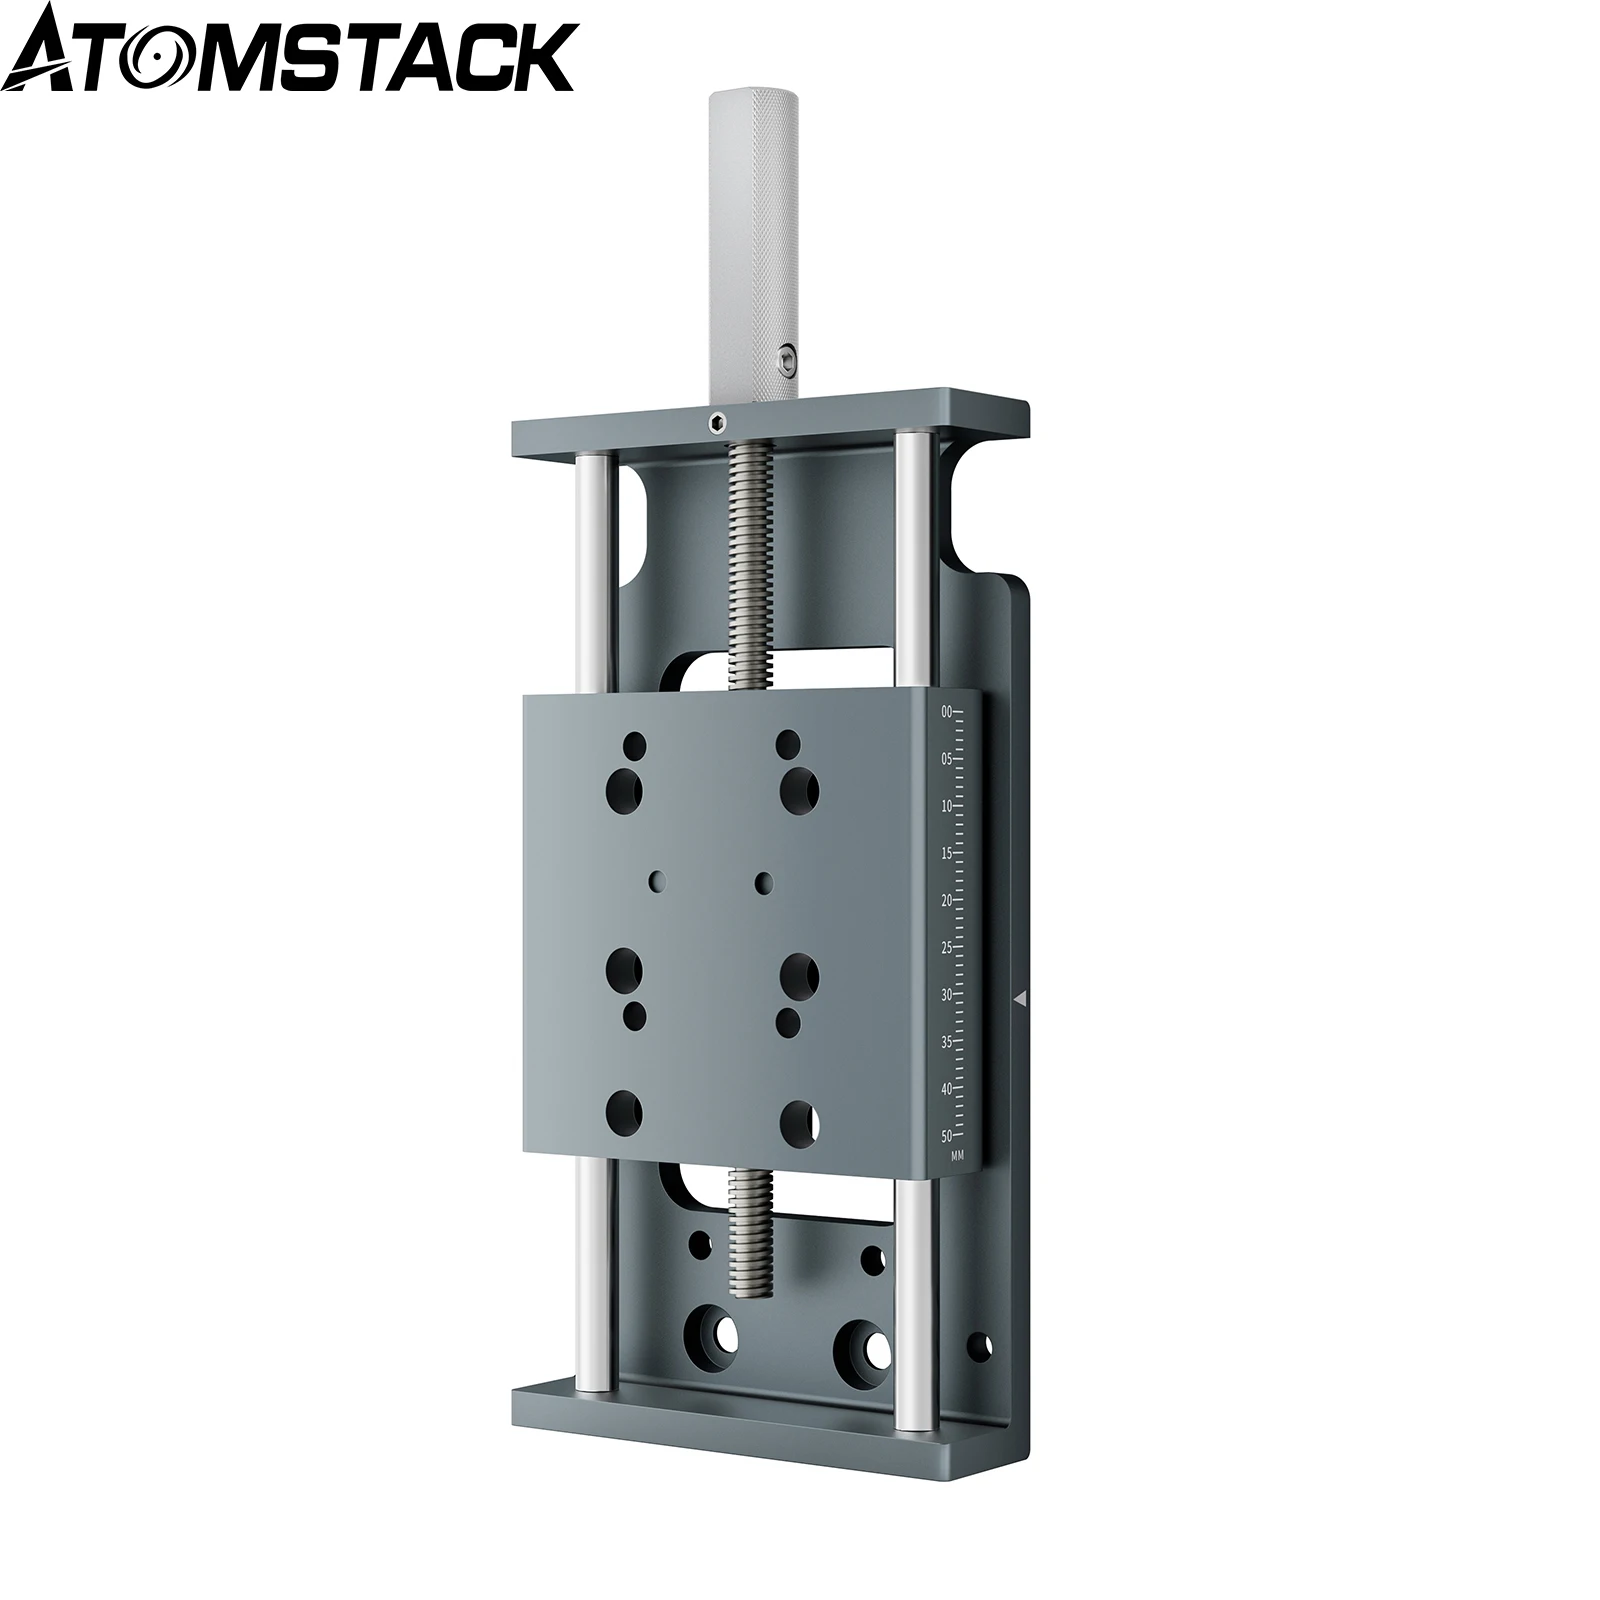 

Atomstack Z Axis Sliding Lifting Device Suitable for Atomstack A5/X7/S10/S20/X20/A20 Laser Engraving Machine Precision Focus